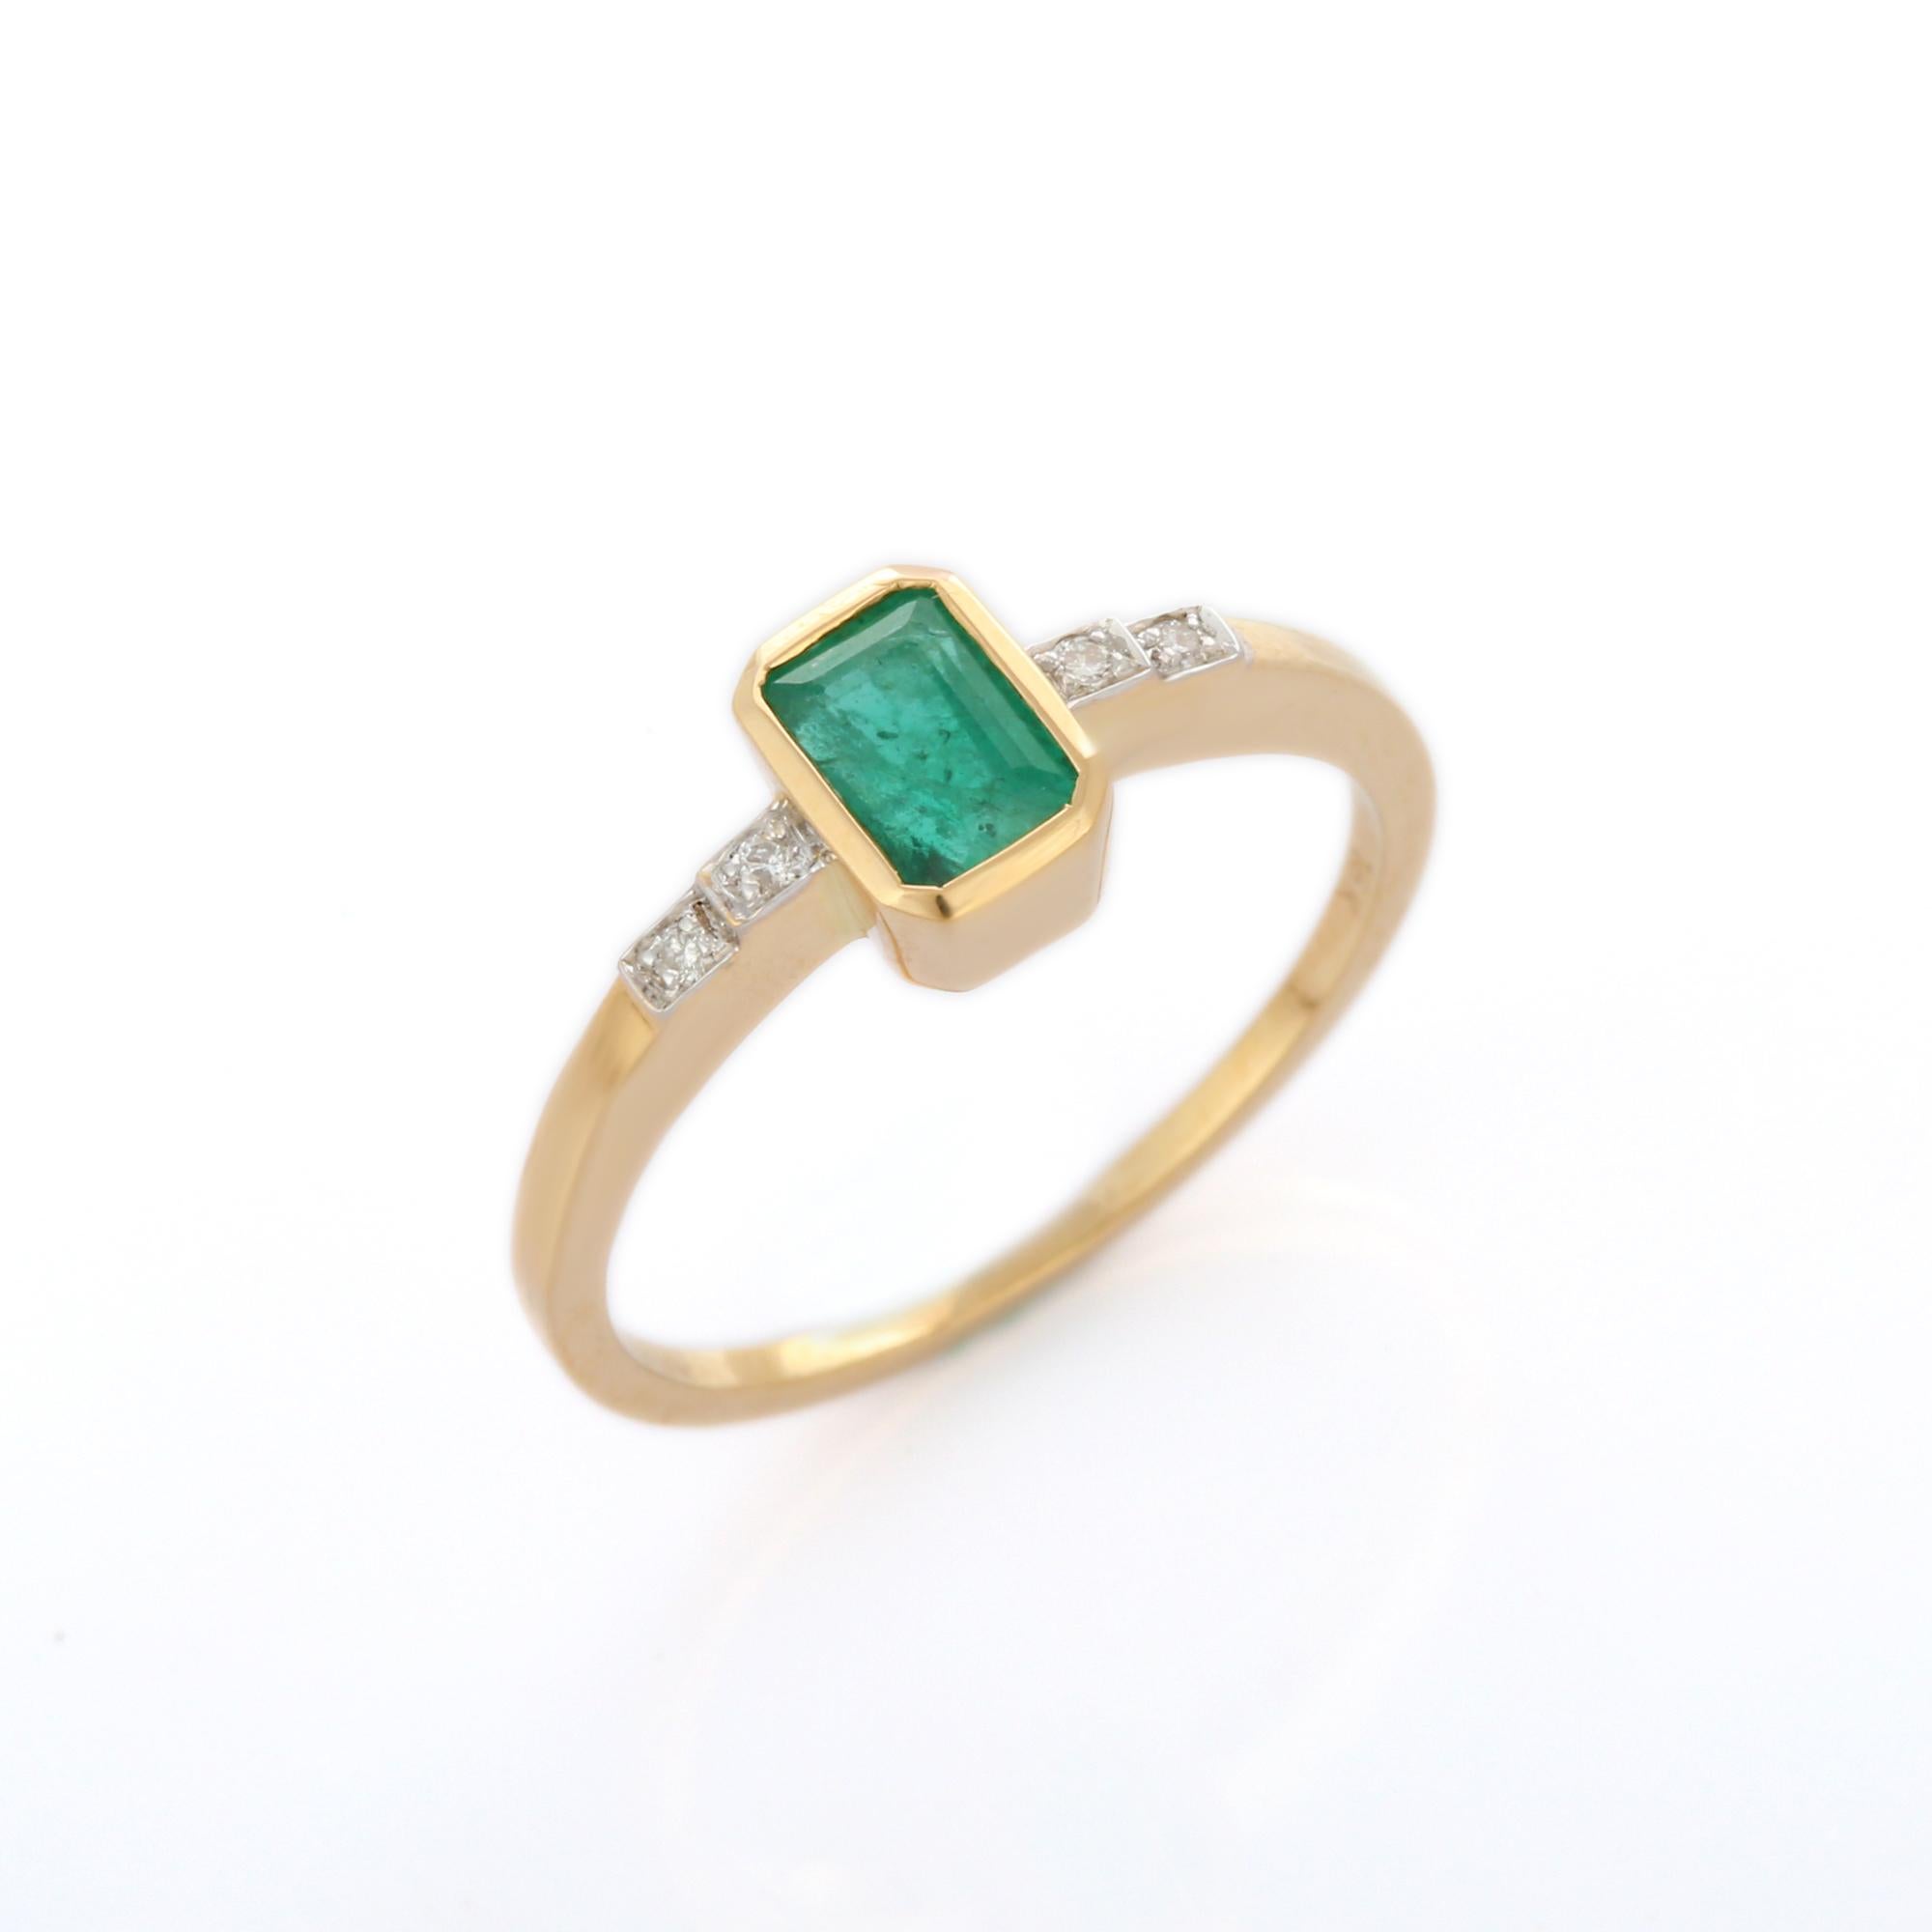 For Sale:  18K Yellow Gold Octagon Cut Emerald and Diamond Stackable Ring, Gift for Her 2